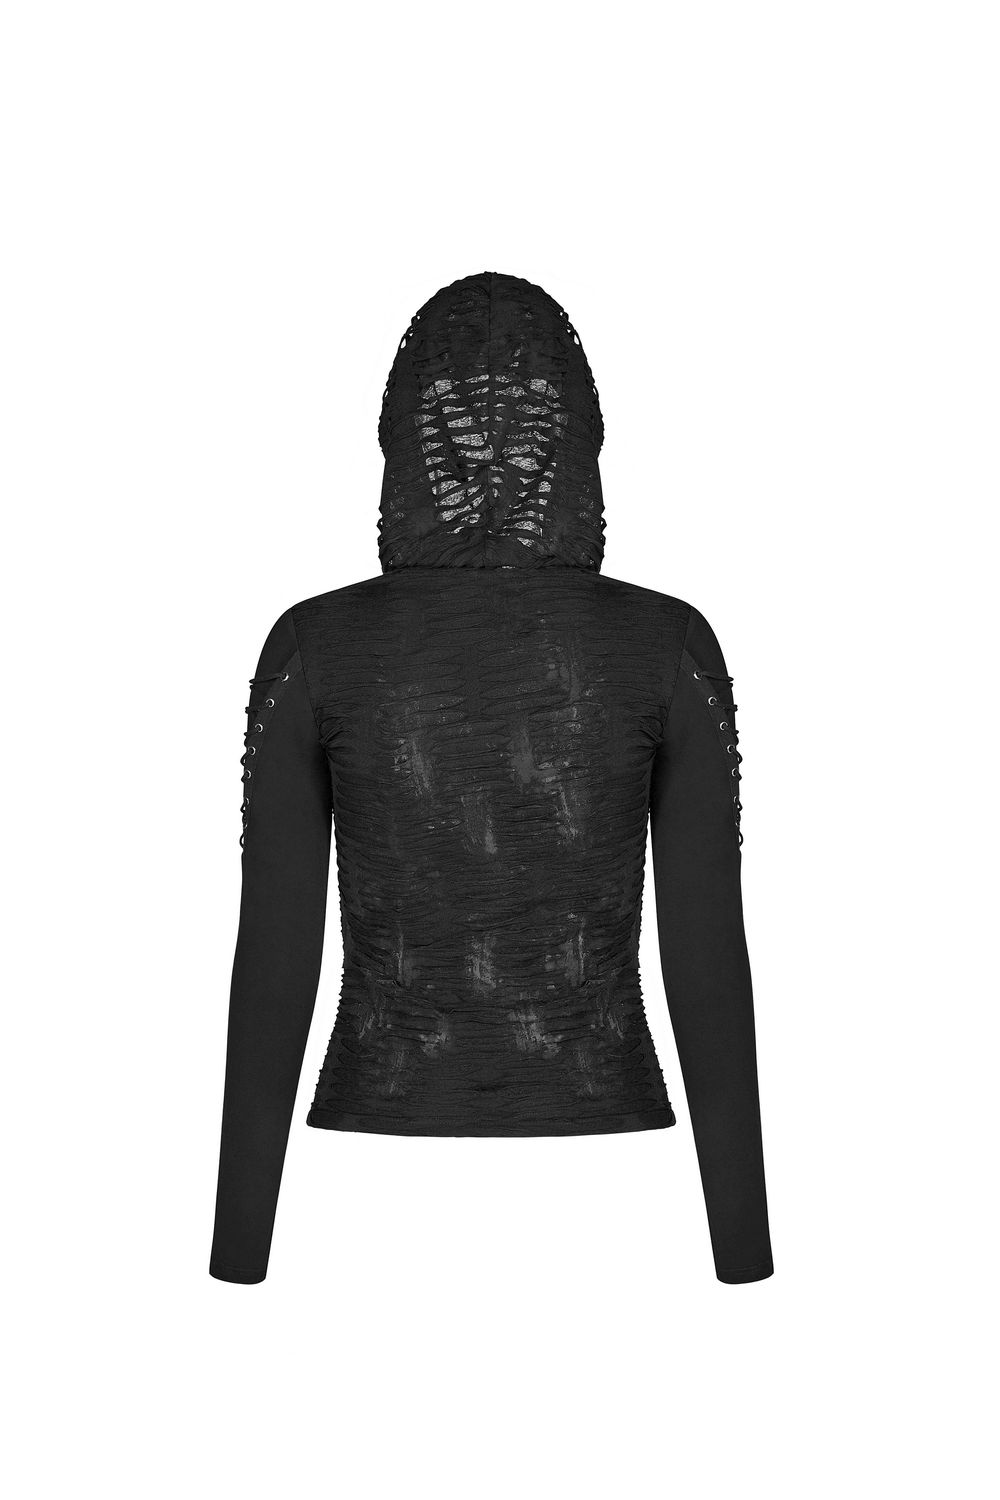 Edgy Women's Black Lace Up Detail Hooded Sweatshirt